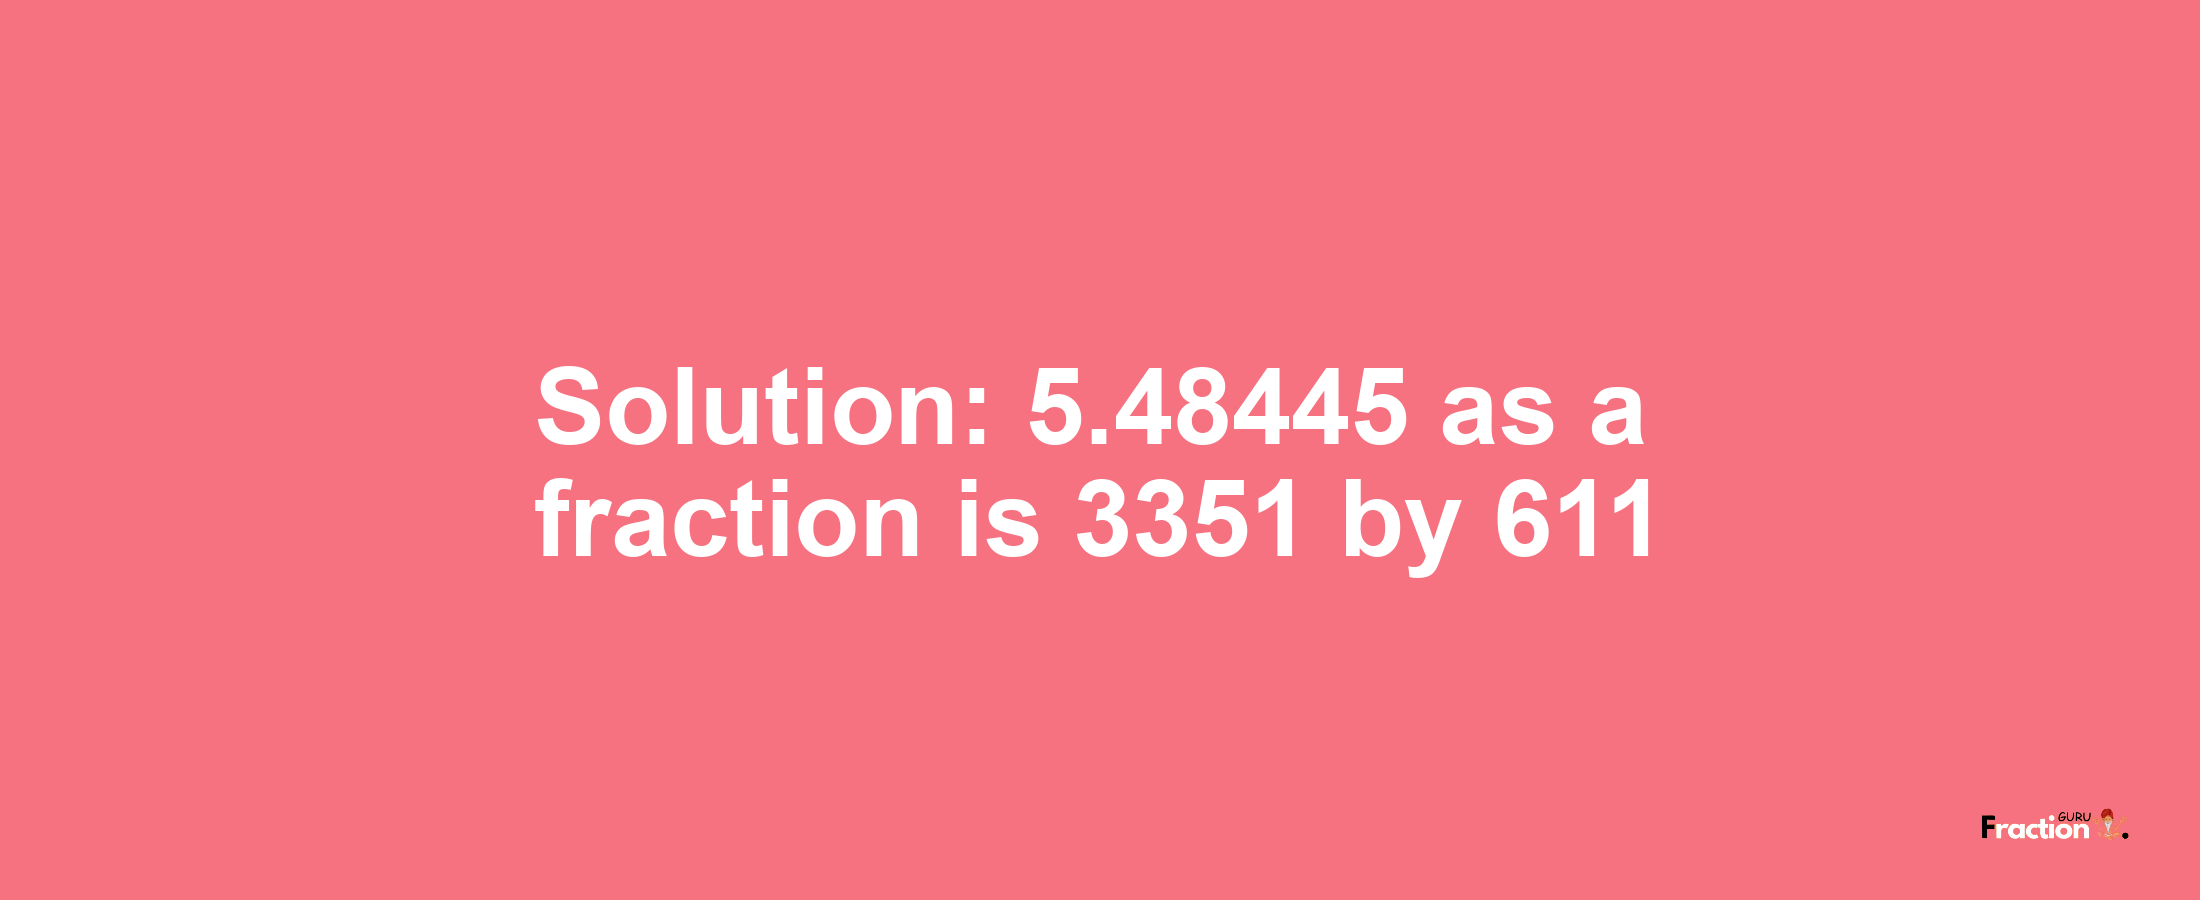 Solution:5.48445 as a fraction is 3351/611